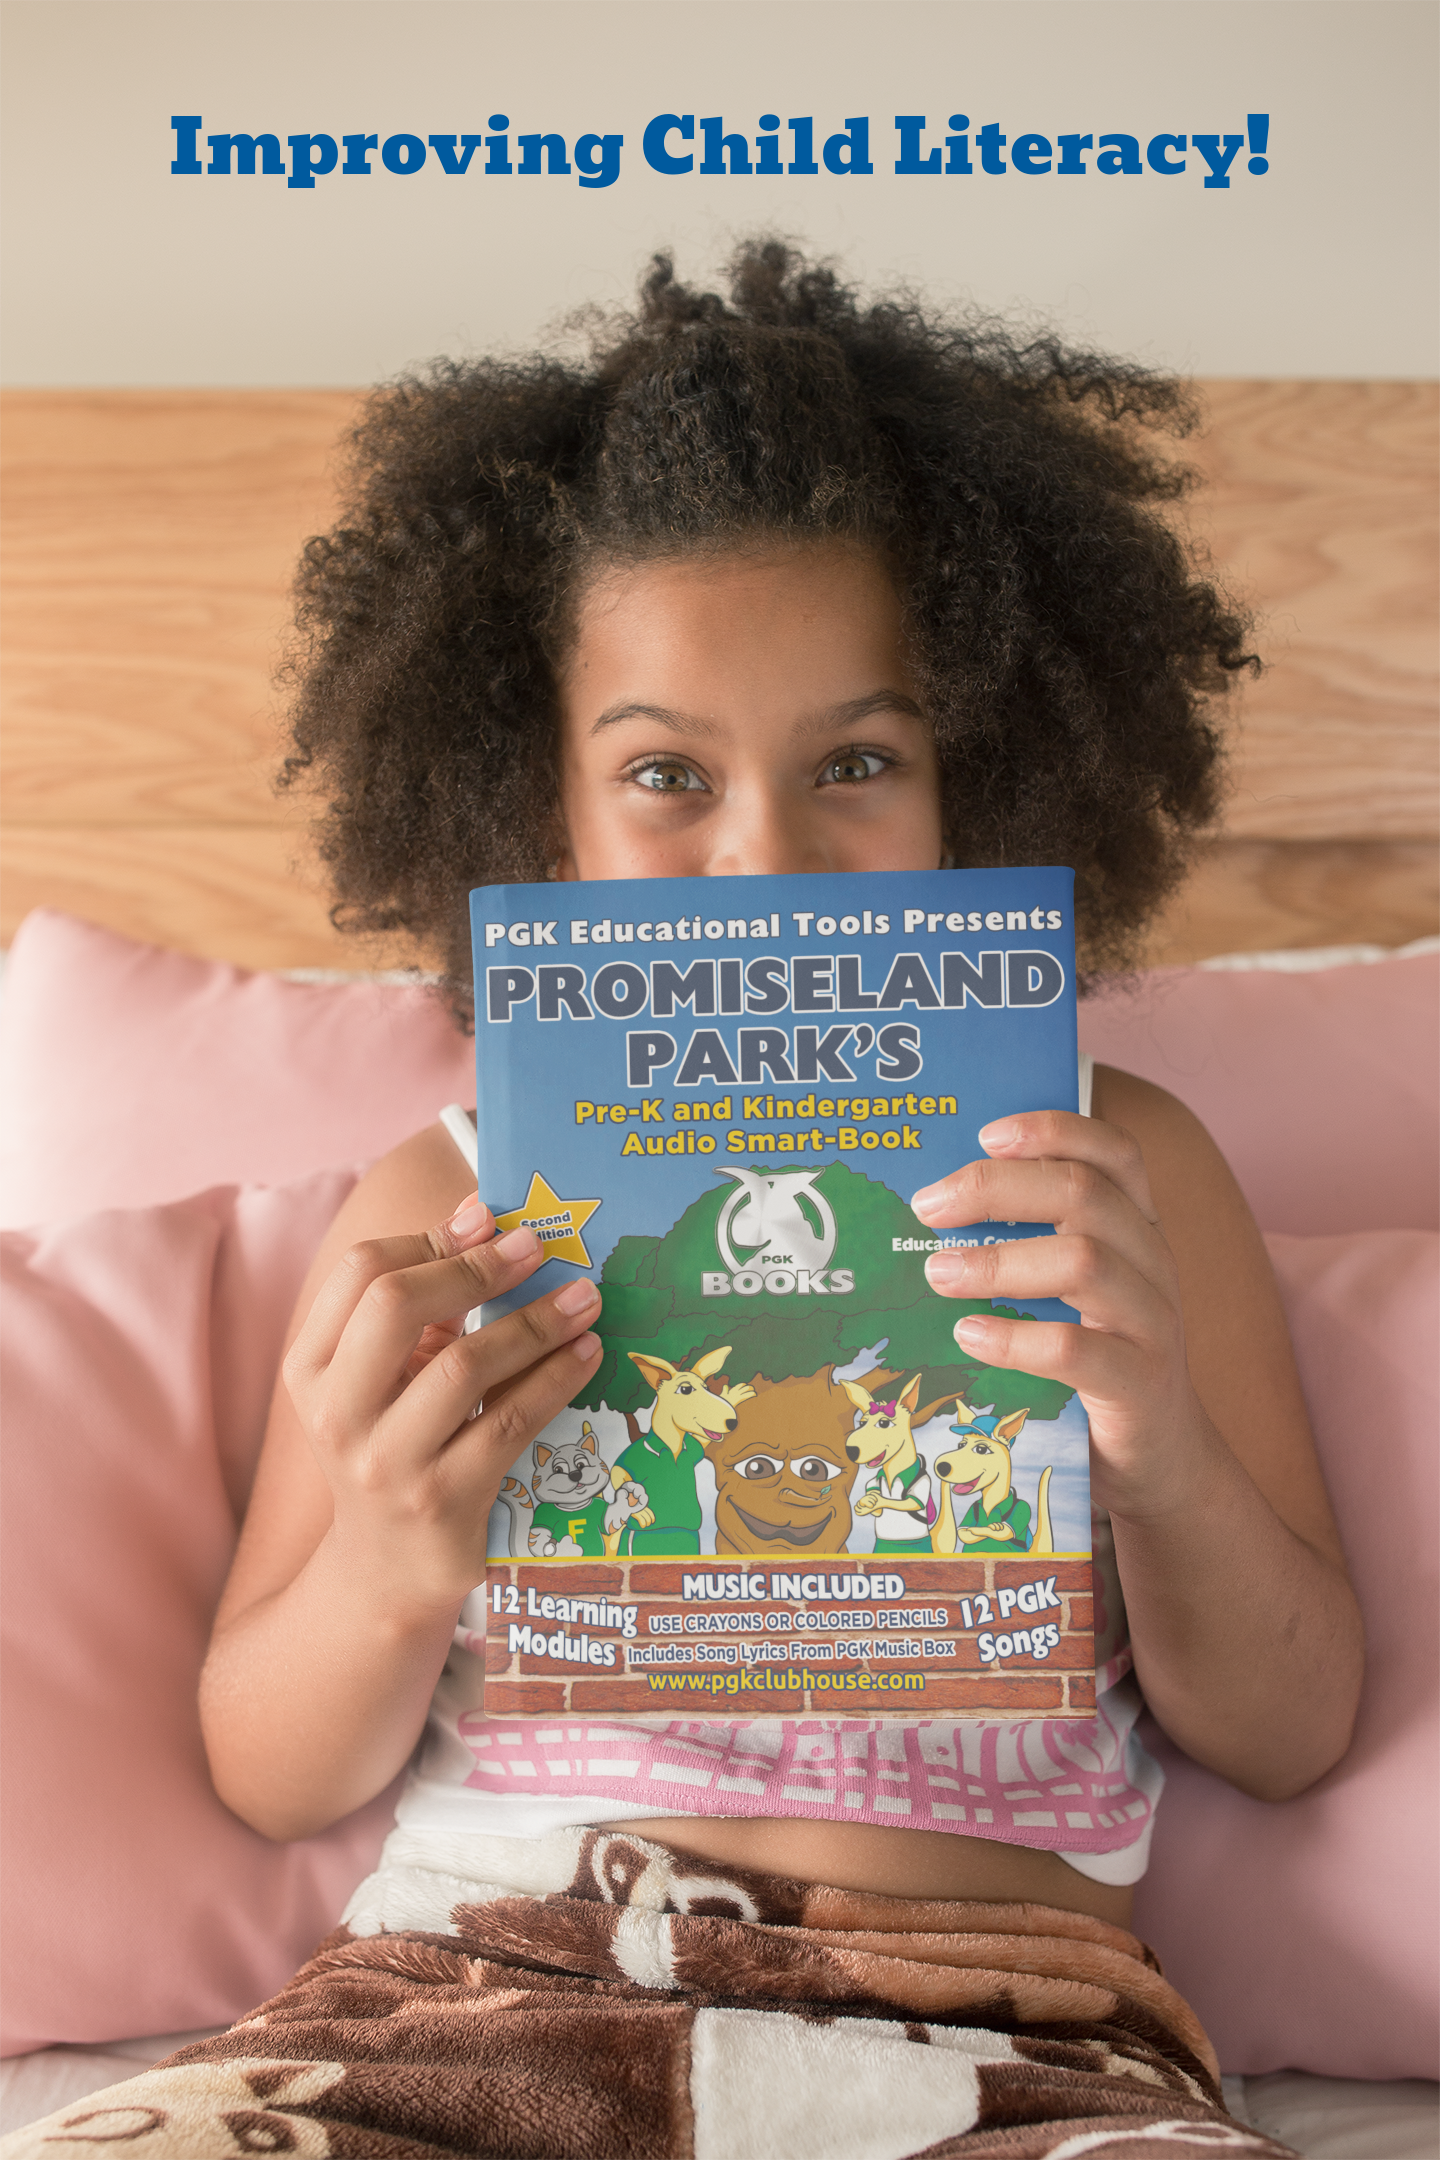 Image of a young girl reacting to Promiseland Park's Pre-K and Kindergarten Audio Smart-Book. 12 learning modules that include exercises, music, and song lyrics. 